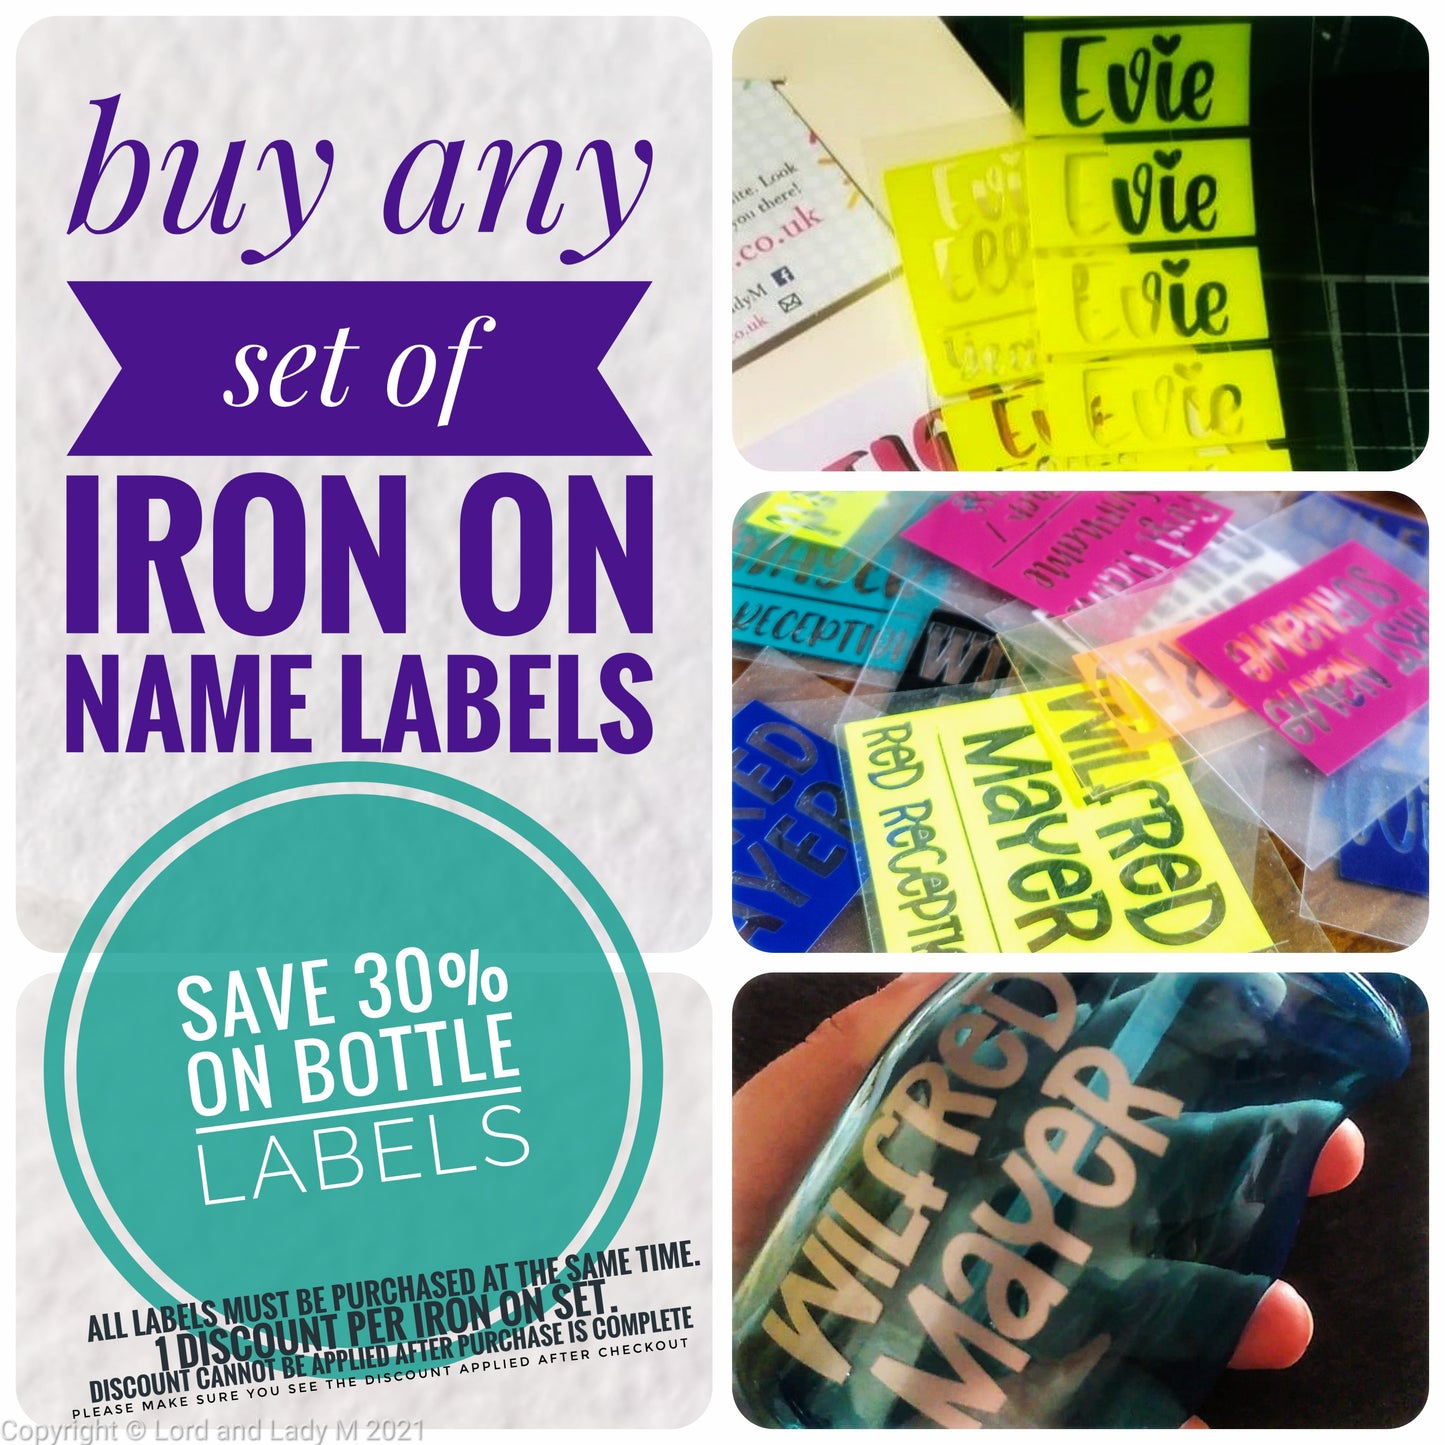 Iron on clothing labels - Offer buy iron ons, get 30% off a bottle label 